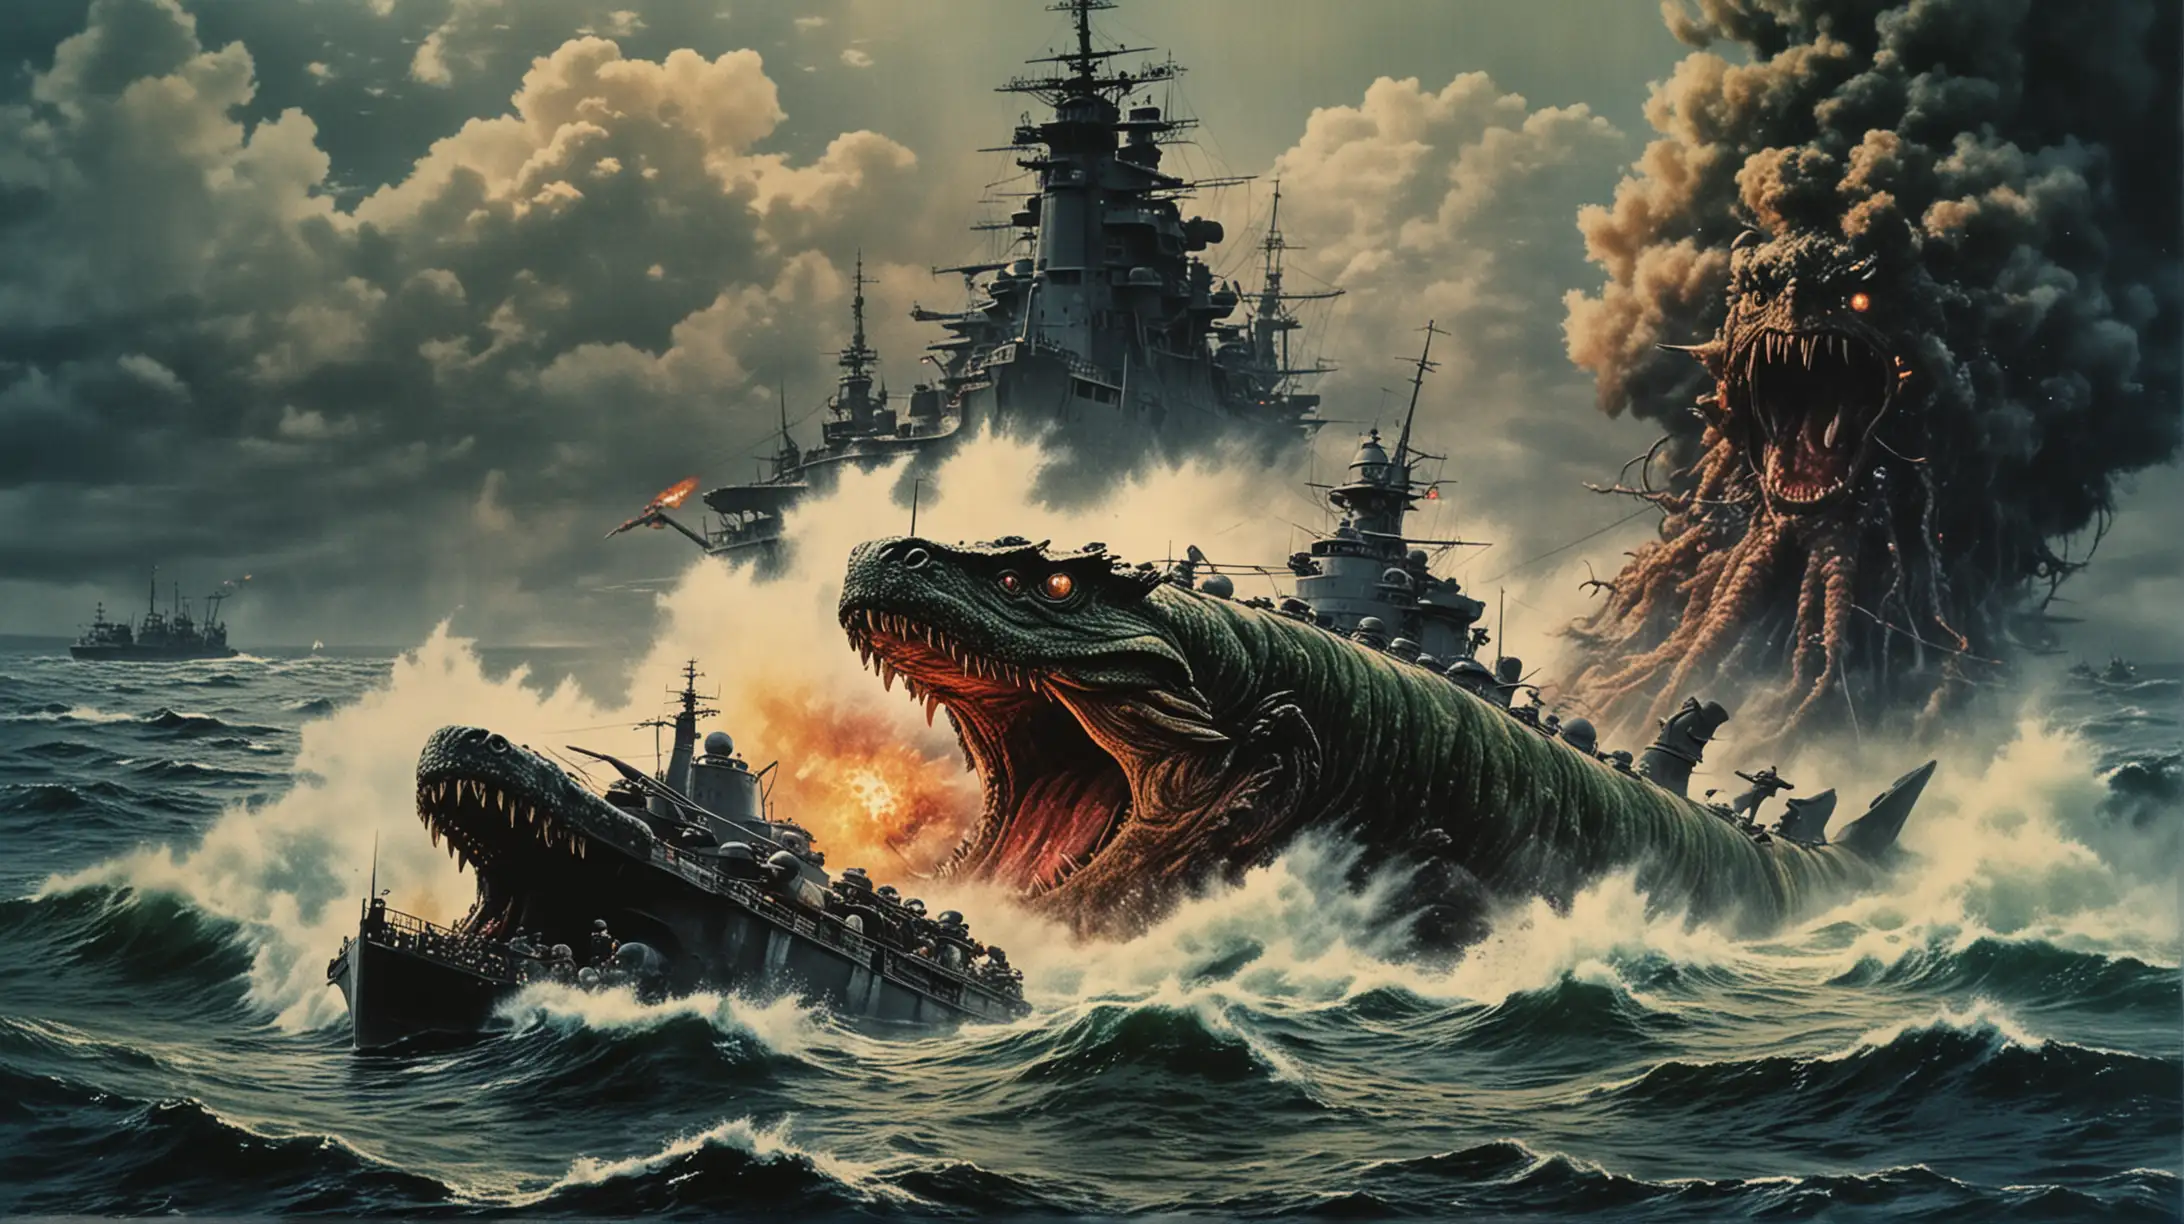 real colourful photo from 1970s Japanese monster film, with a super-massive reptile sea monster fighting a 1940s battleship, dramatic composition, title is “Codename:  Monster” written at top